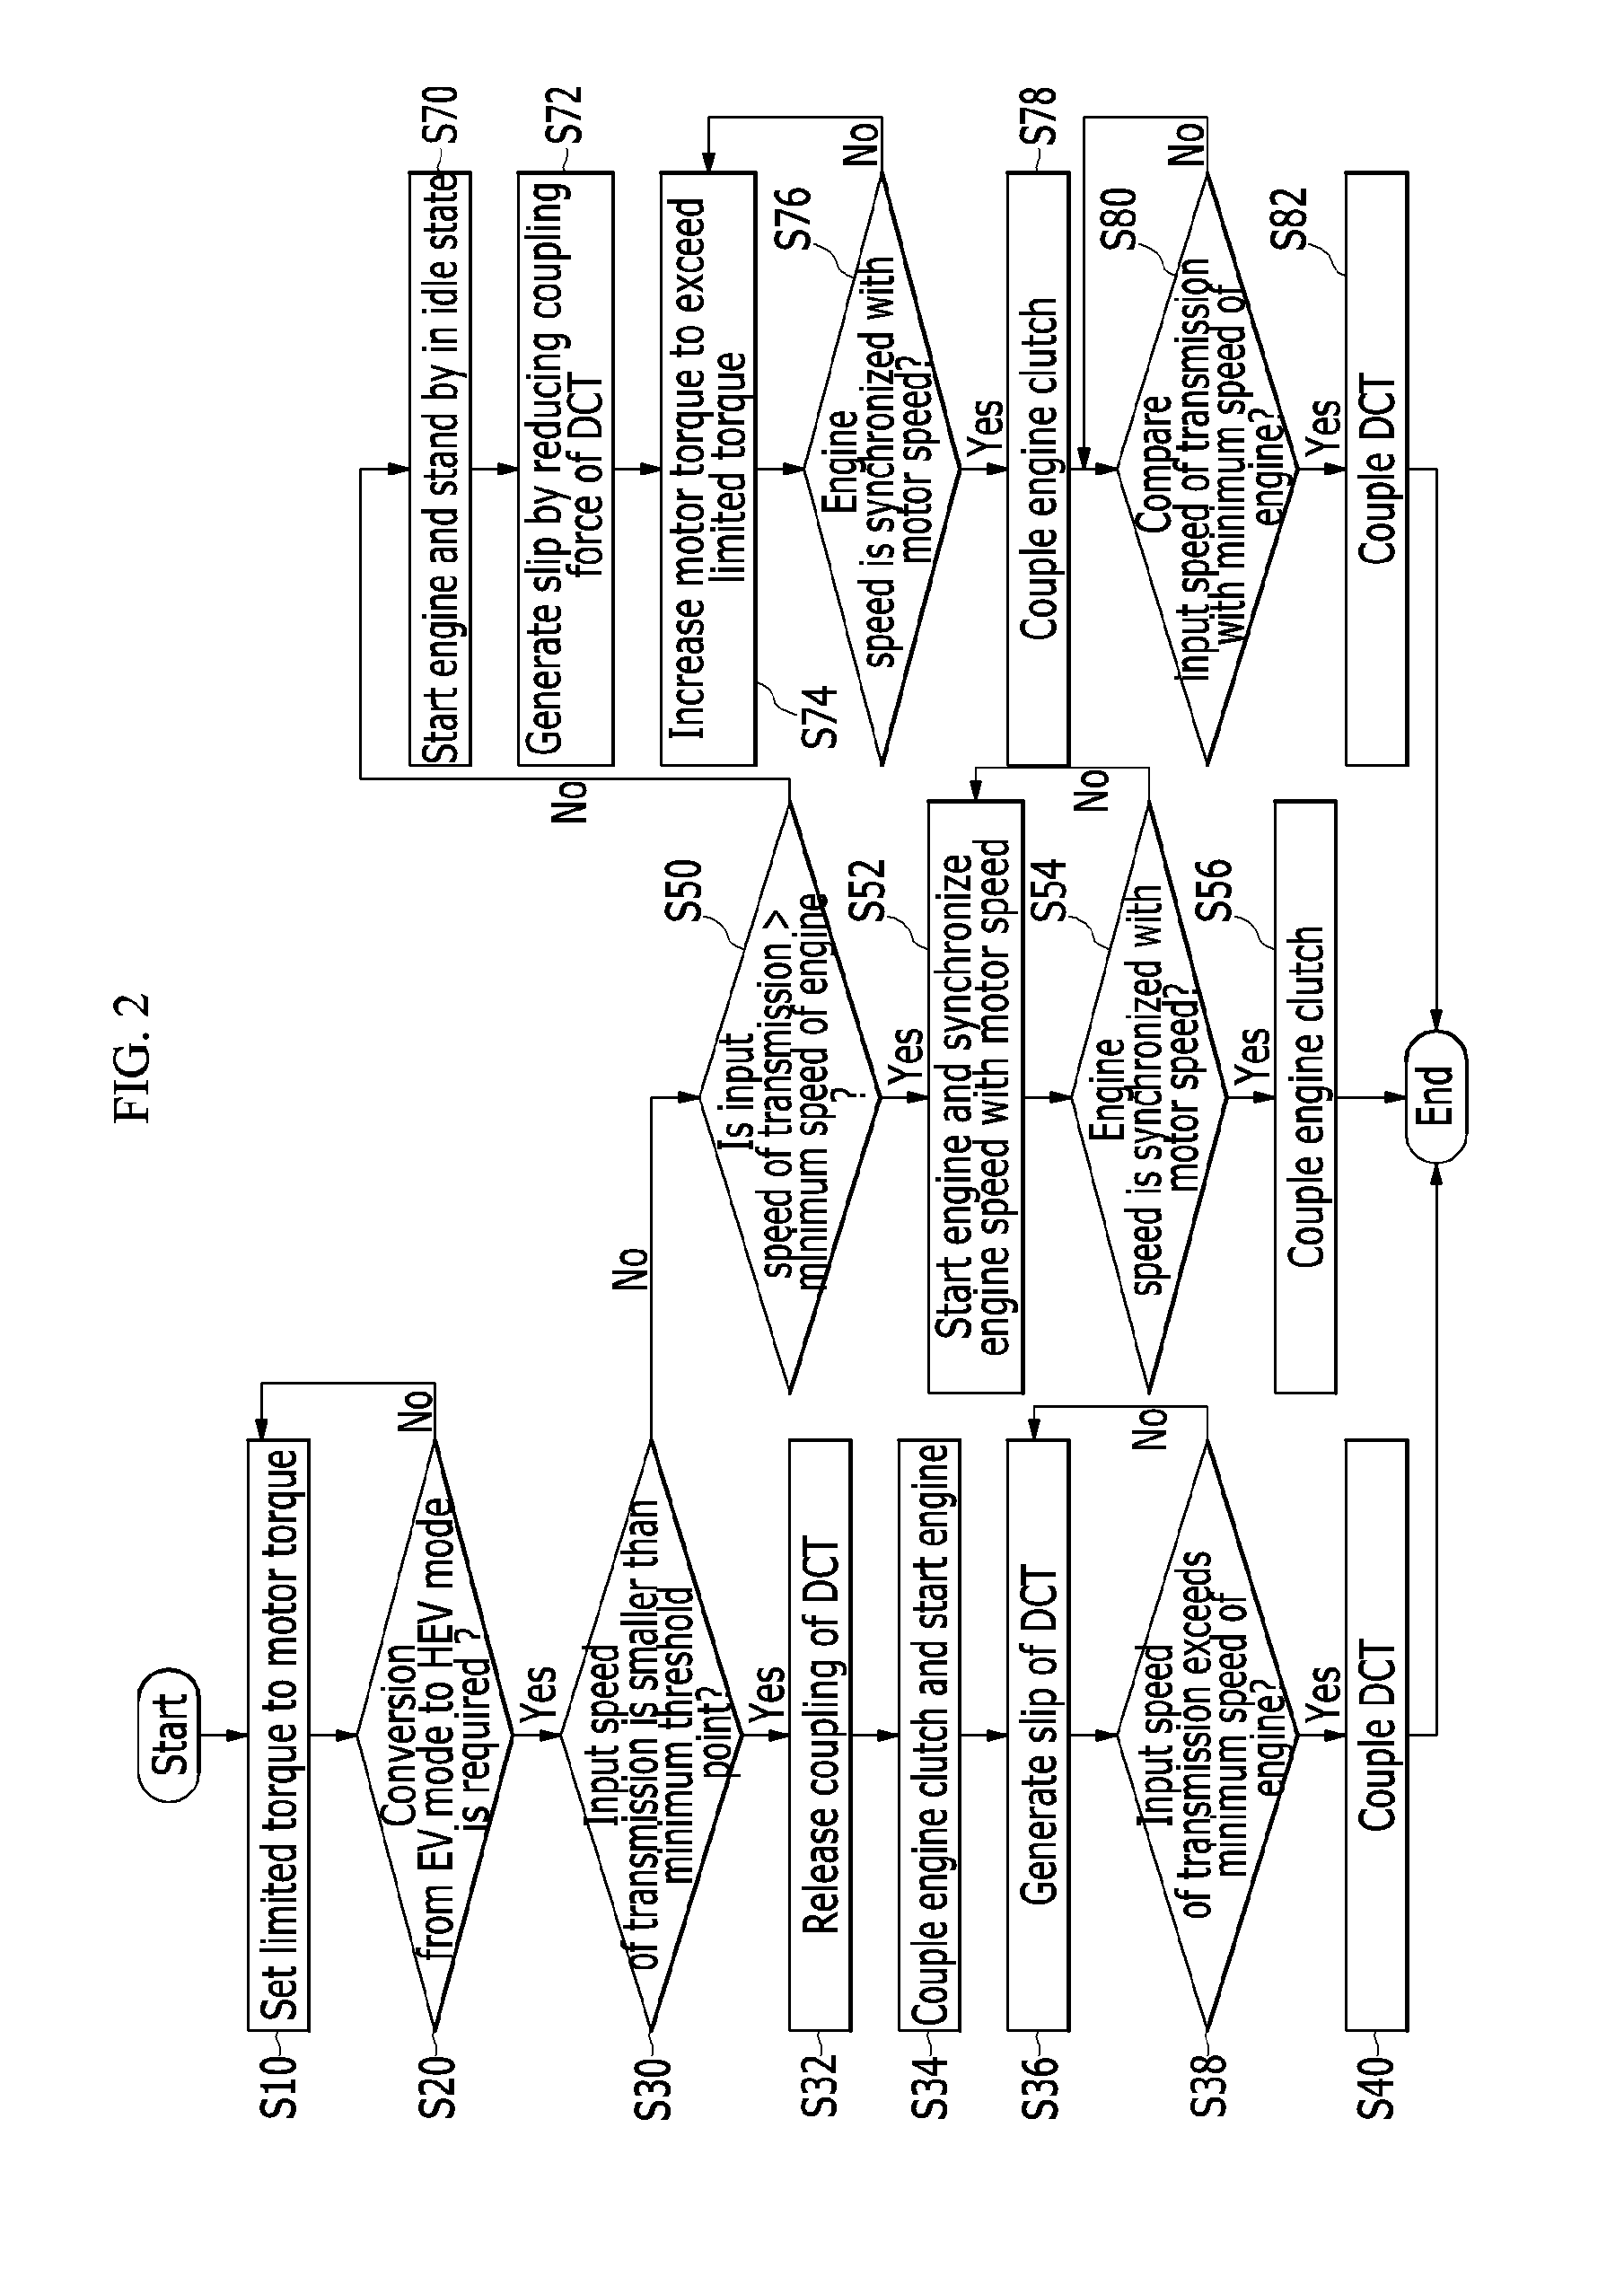 Apparatus and method for controlling clutch of hybrid vehicle